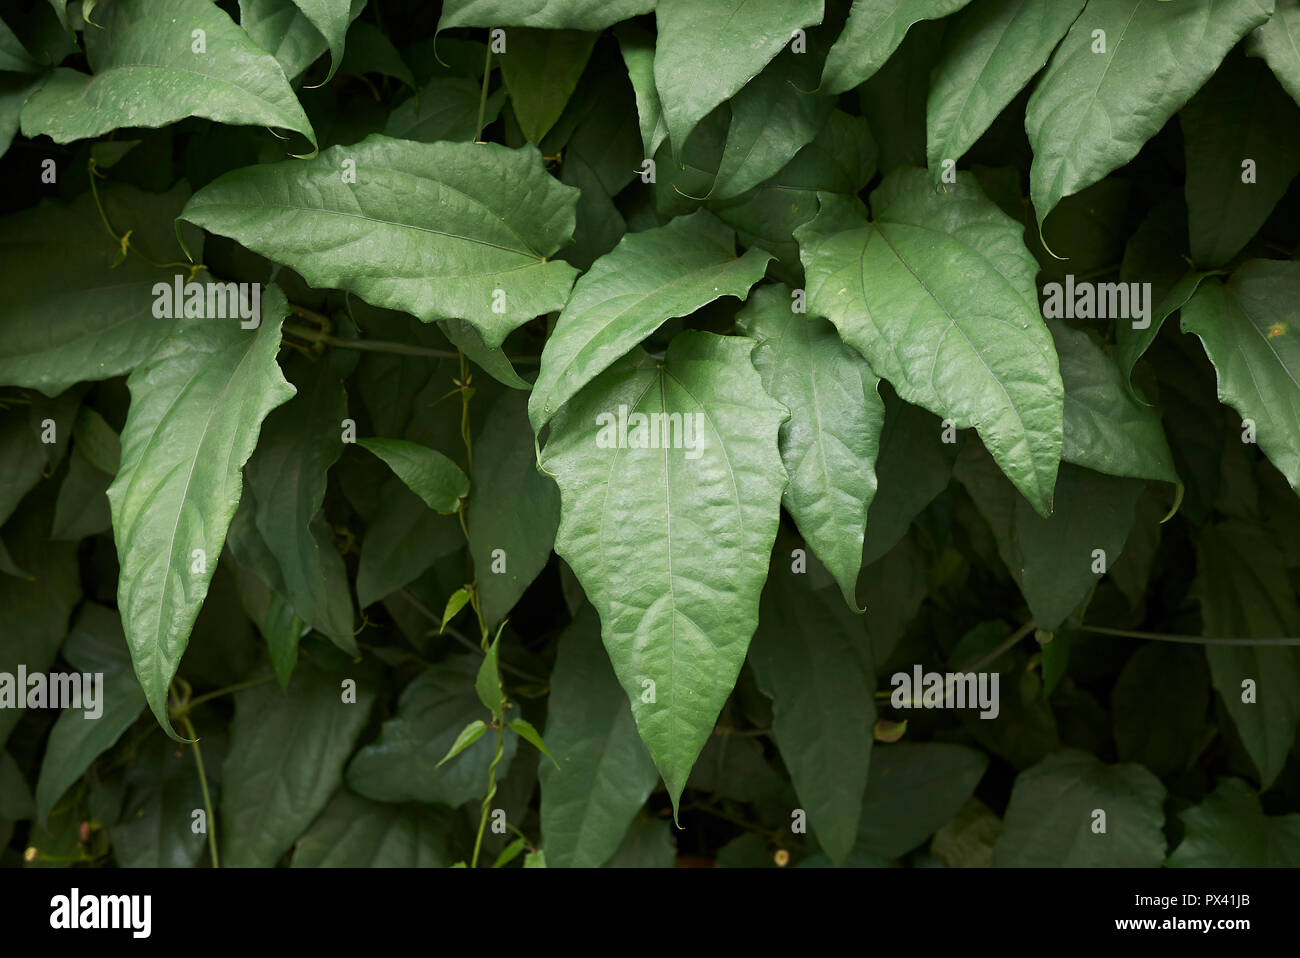 Thunbergia laurifolia leaves and flowers Stock Photo